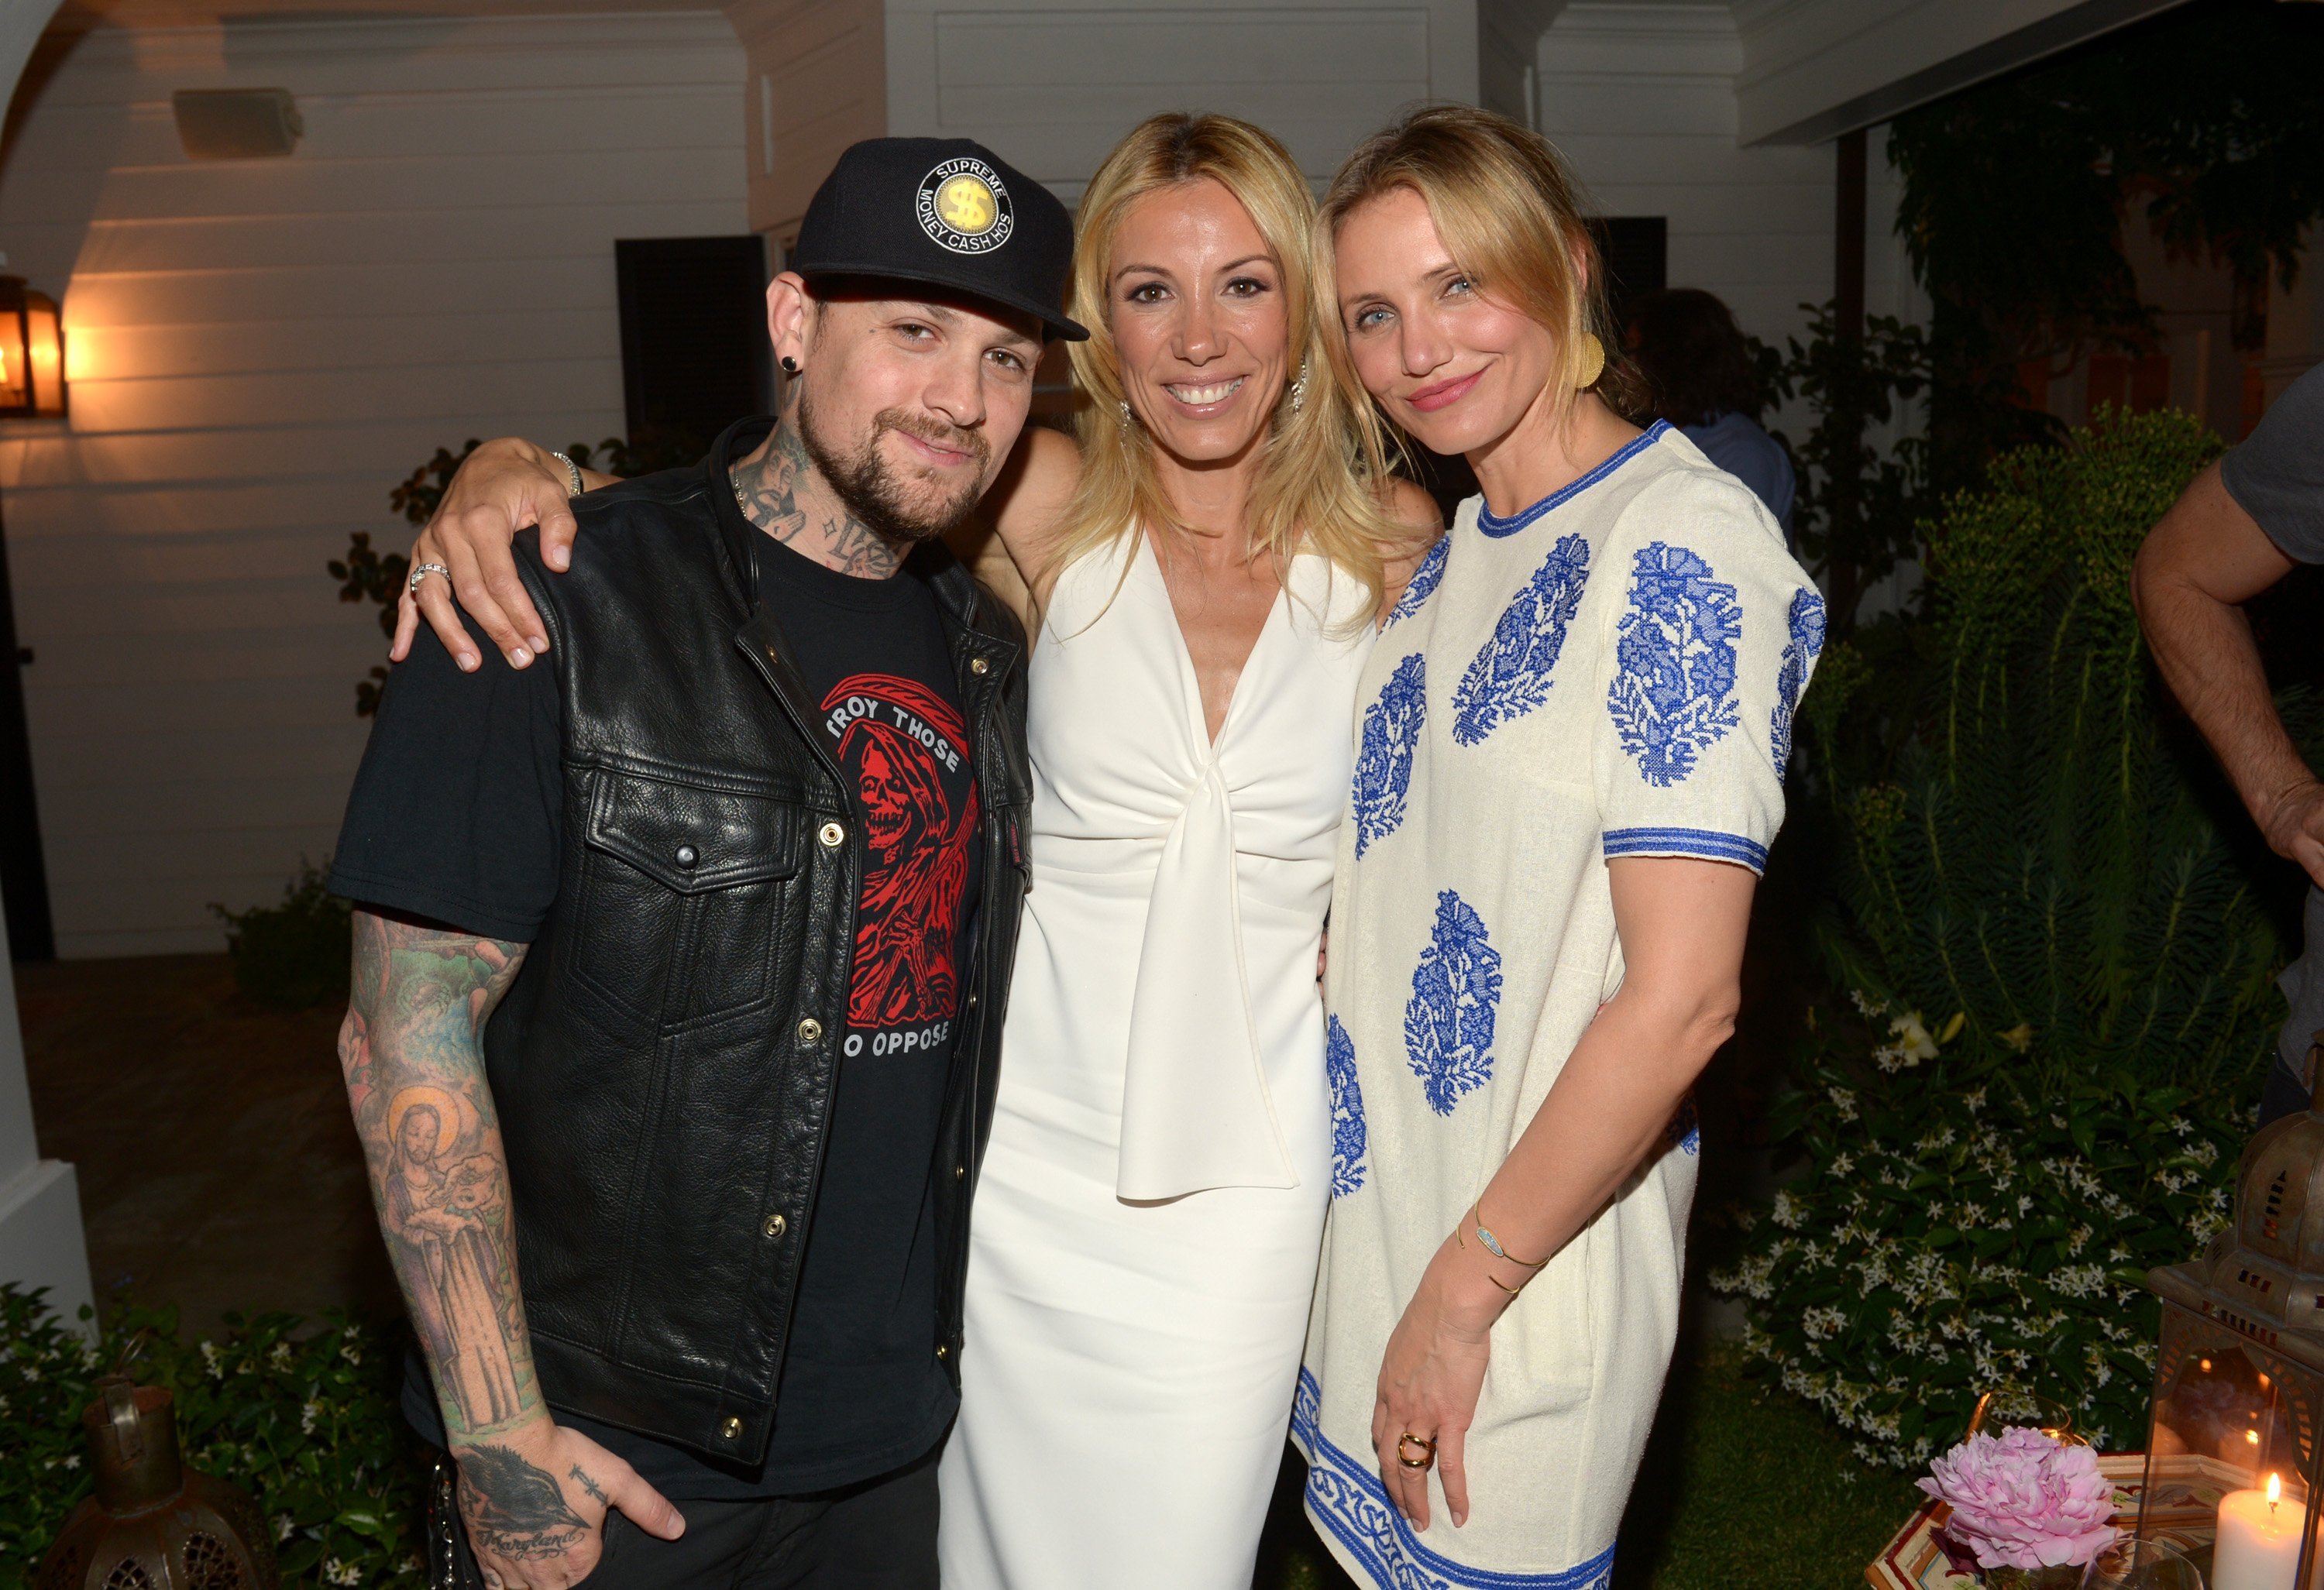  Benji Madden, author Vicky Vlachonis, and actress Cameron Diaz celebrate the launch of The Body Doesn't Lie by Vicky Vlachonis on May 15, 2014, in Los Angeles, California. | Source: Getty Images.